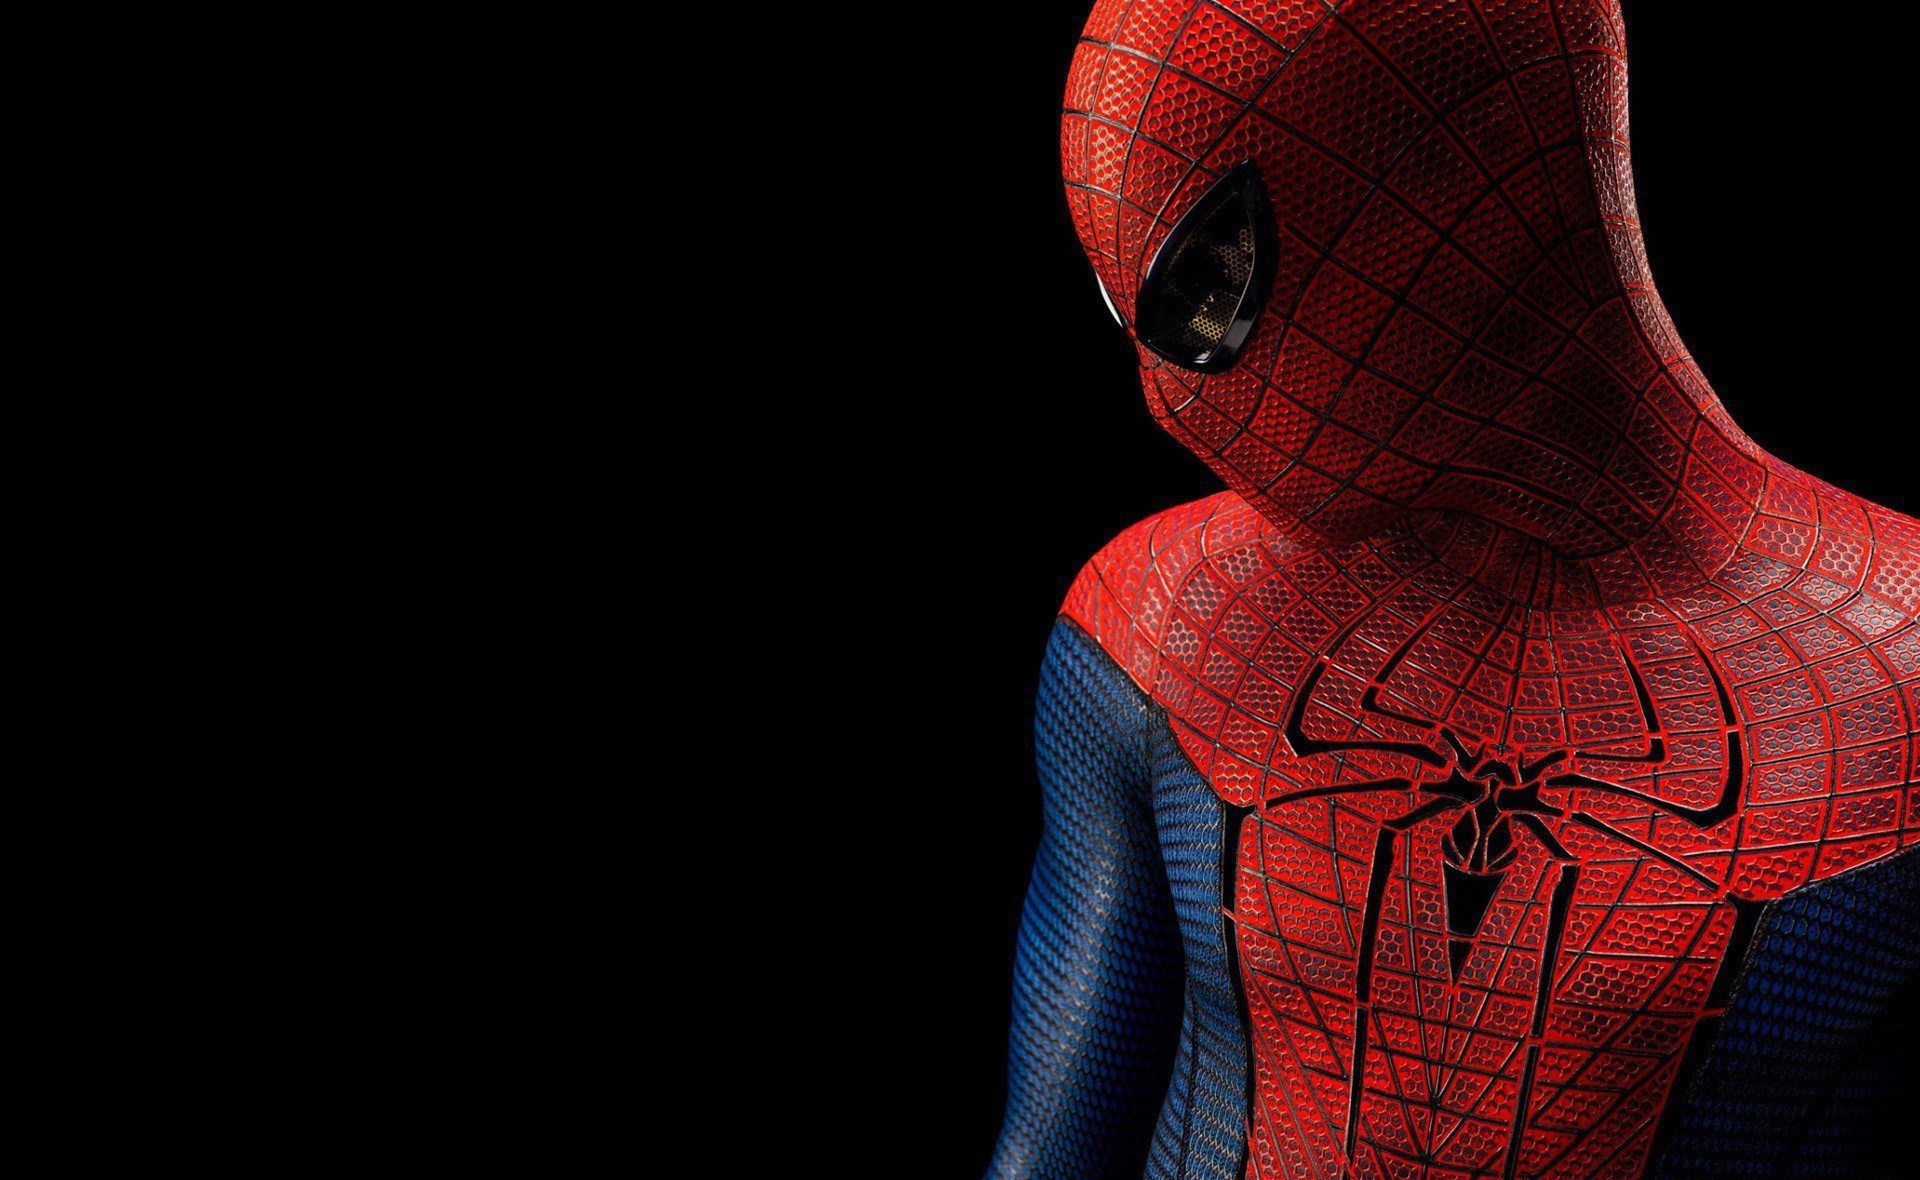 Black background, Spider-Man wallpapers and images ...